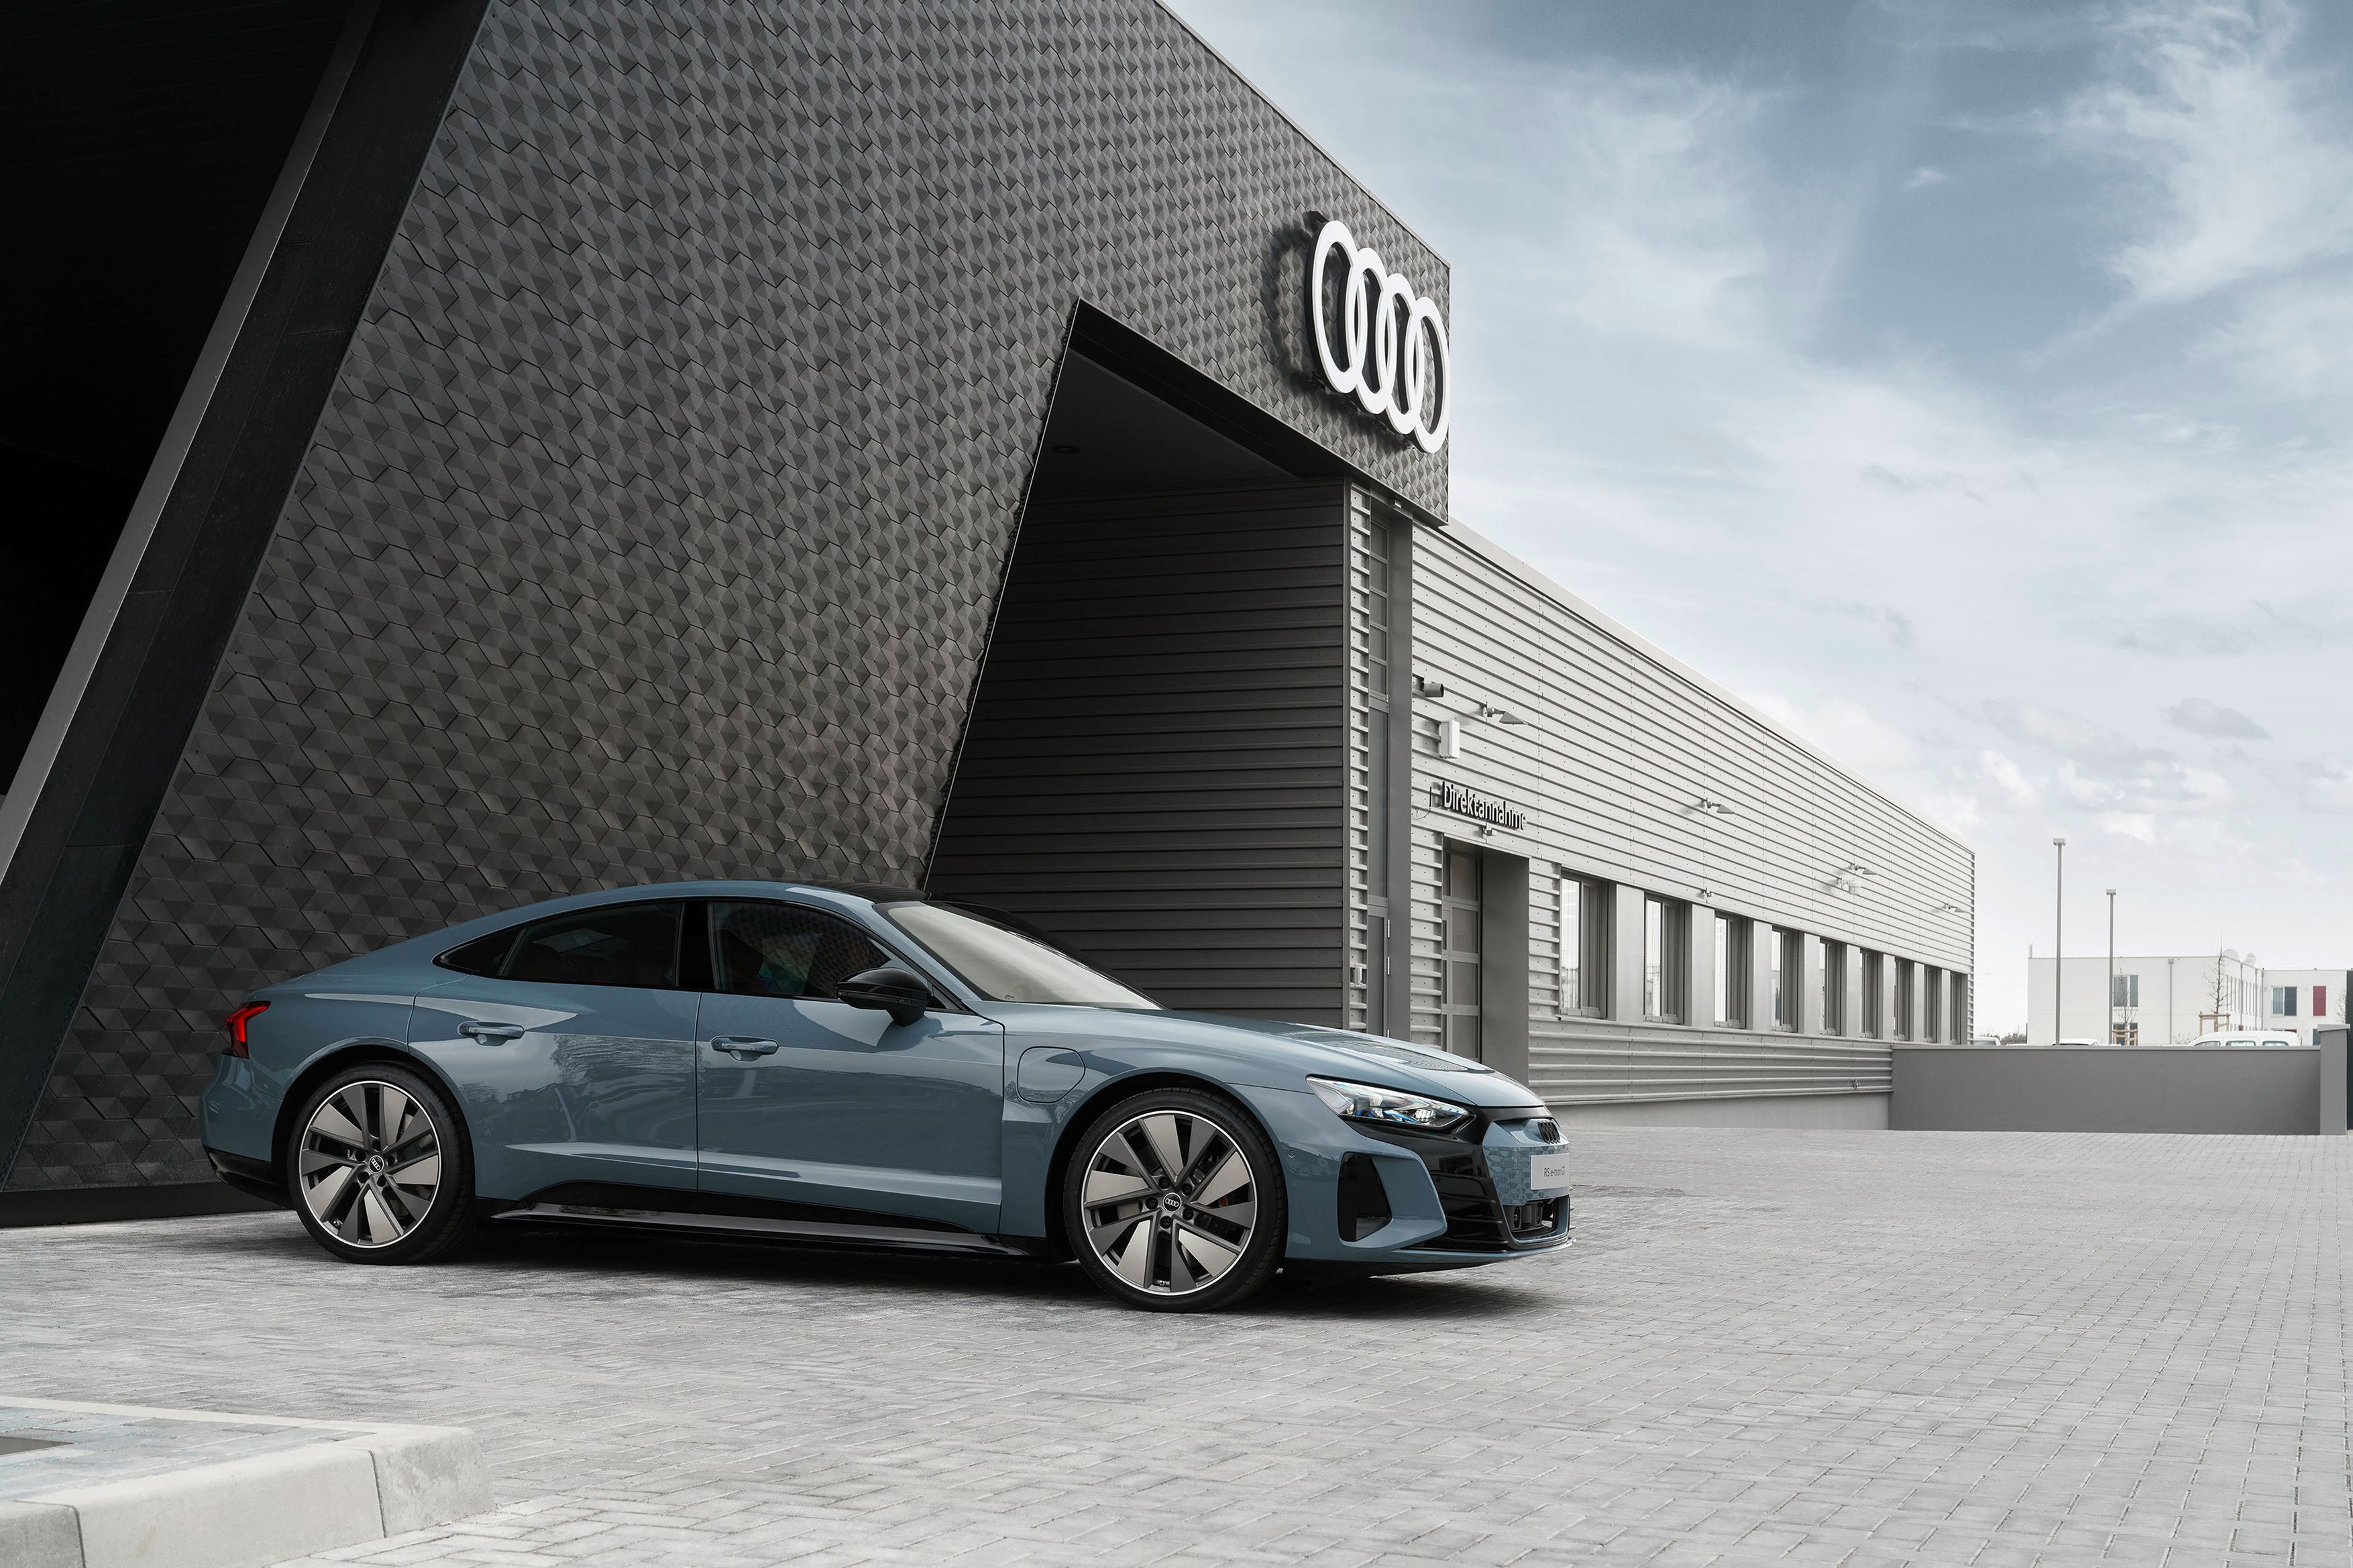 The Audi E-Tron GT parked in front of the Audi headquarters.